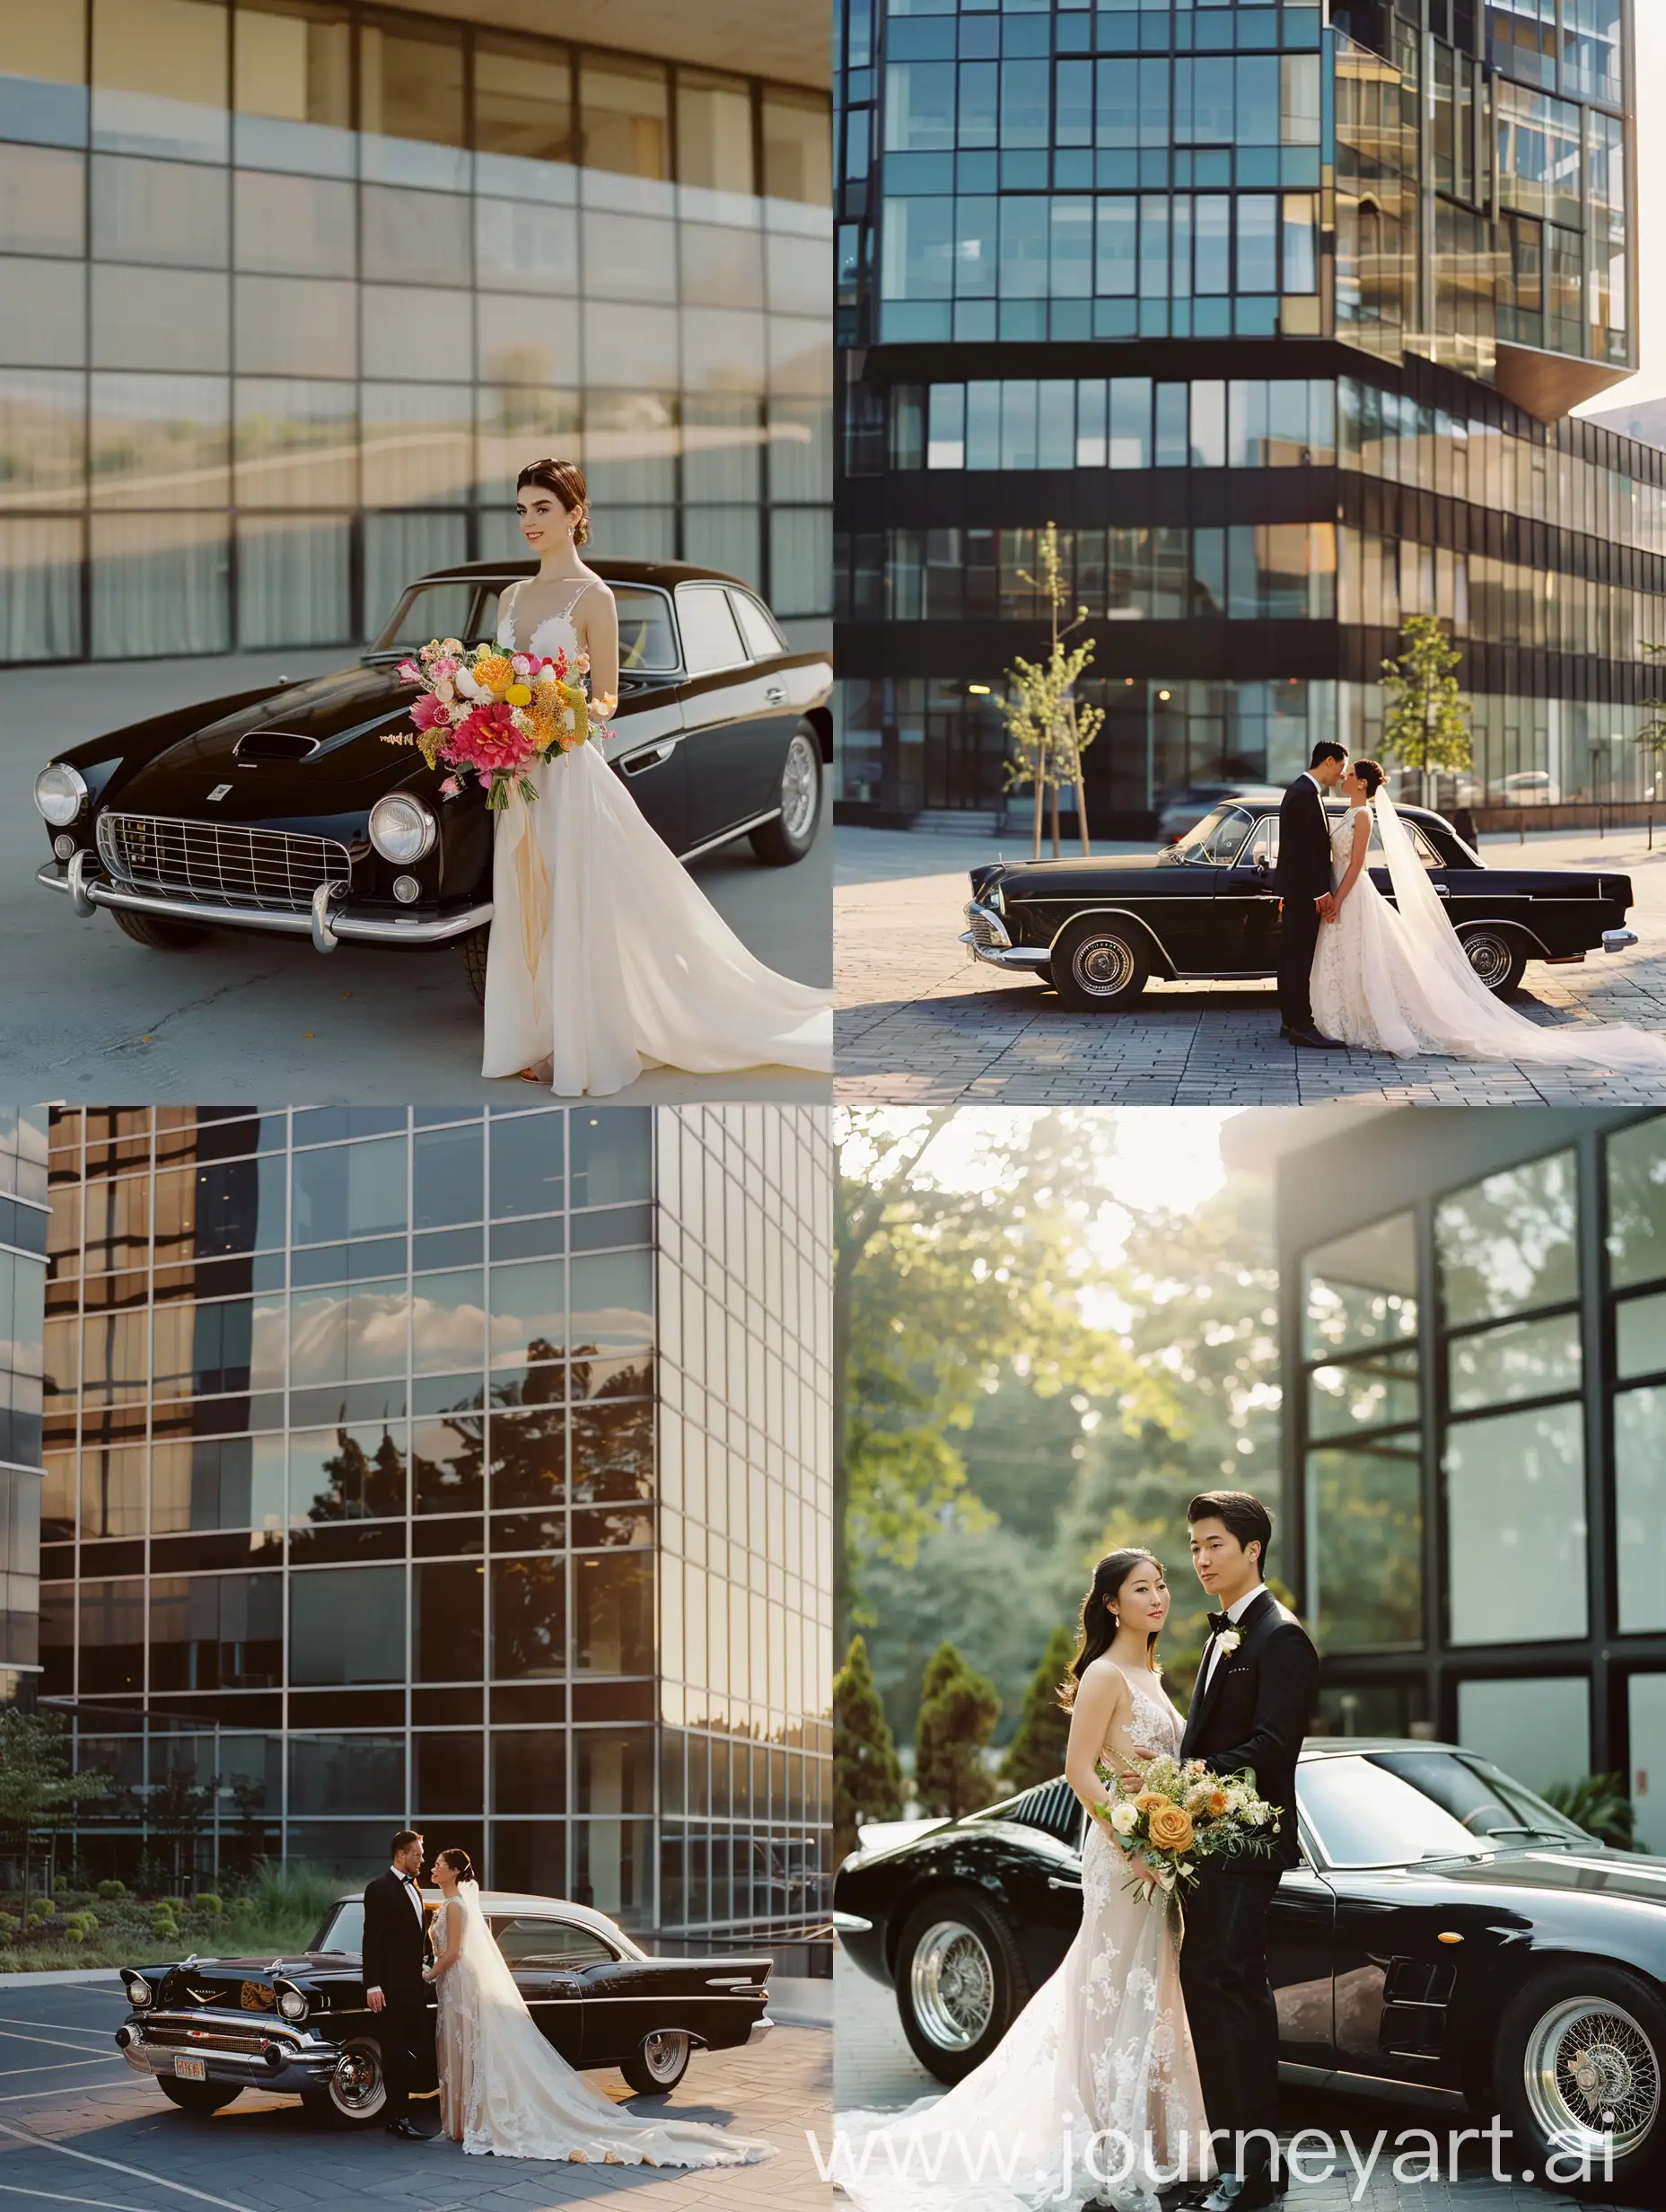 Modern-Building-Wedding-Photoshoot-with-Classic-Car